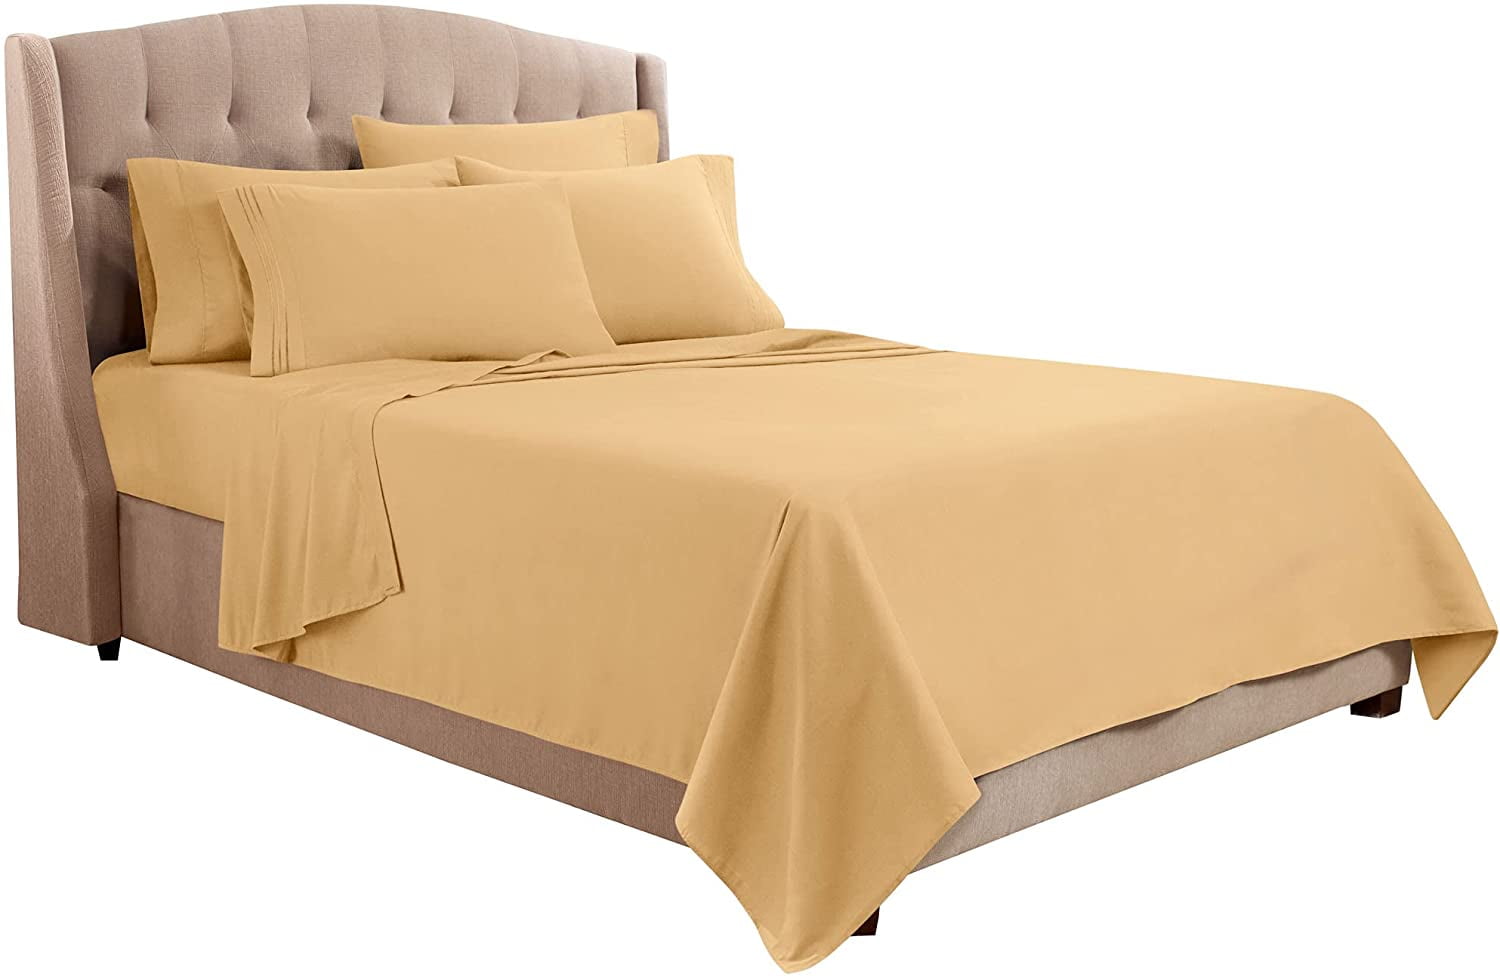 730 Thread Count King Size Duvet Cover 100% Egyptian Cotton Premium Quality Solid Pattern Light Yellow